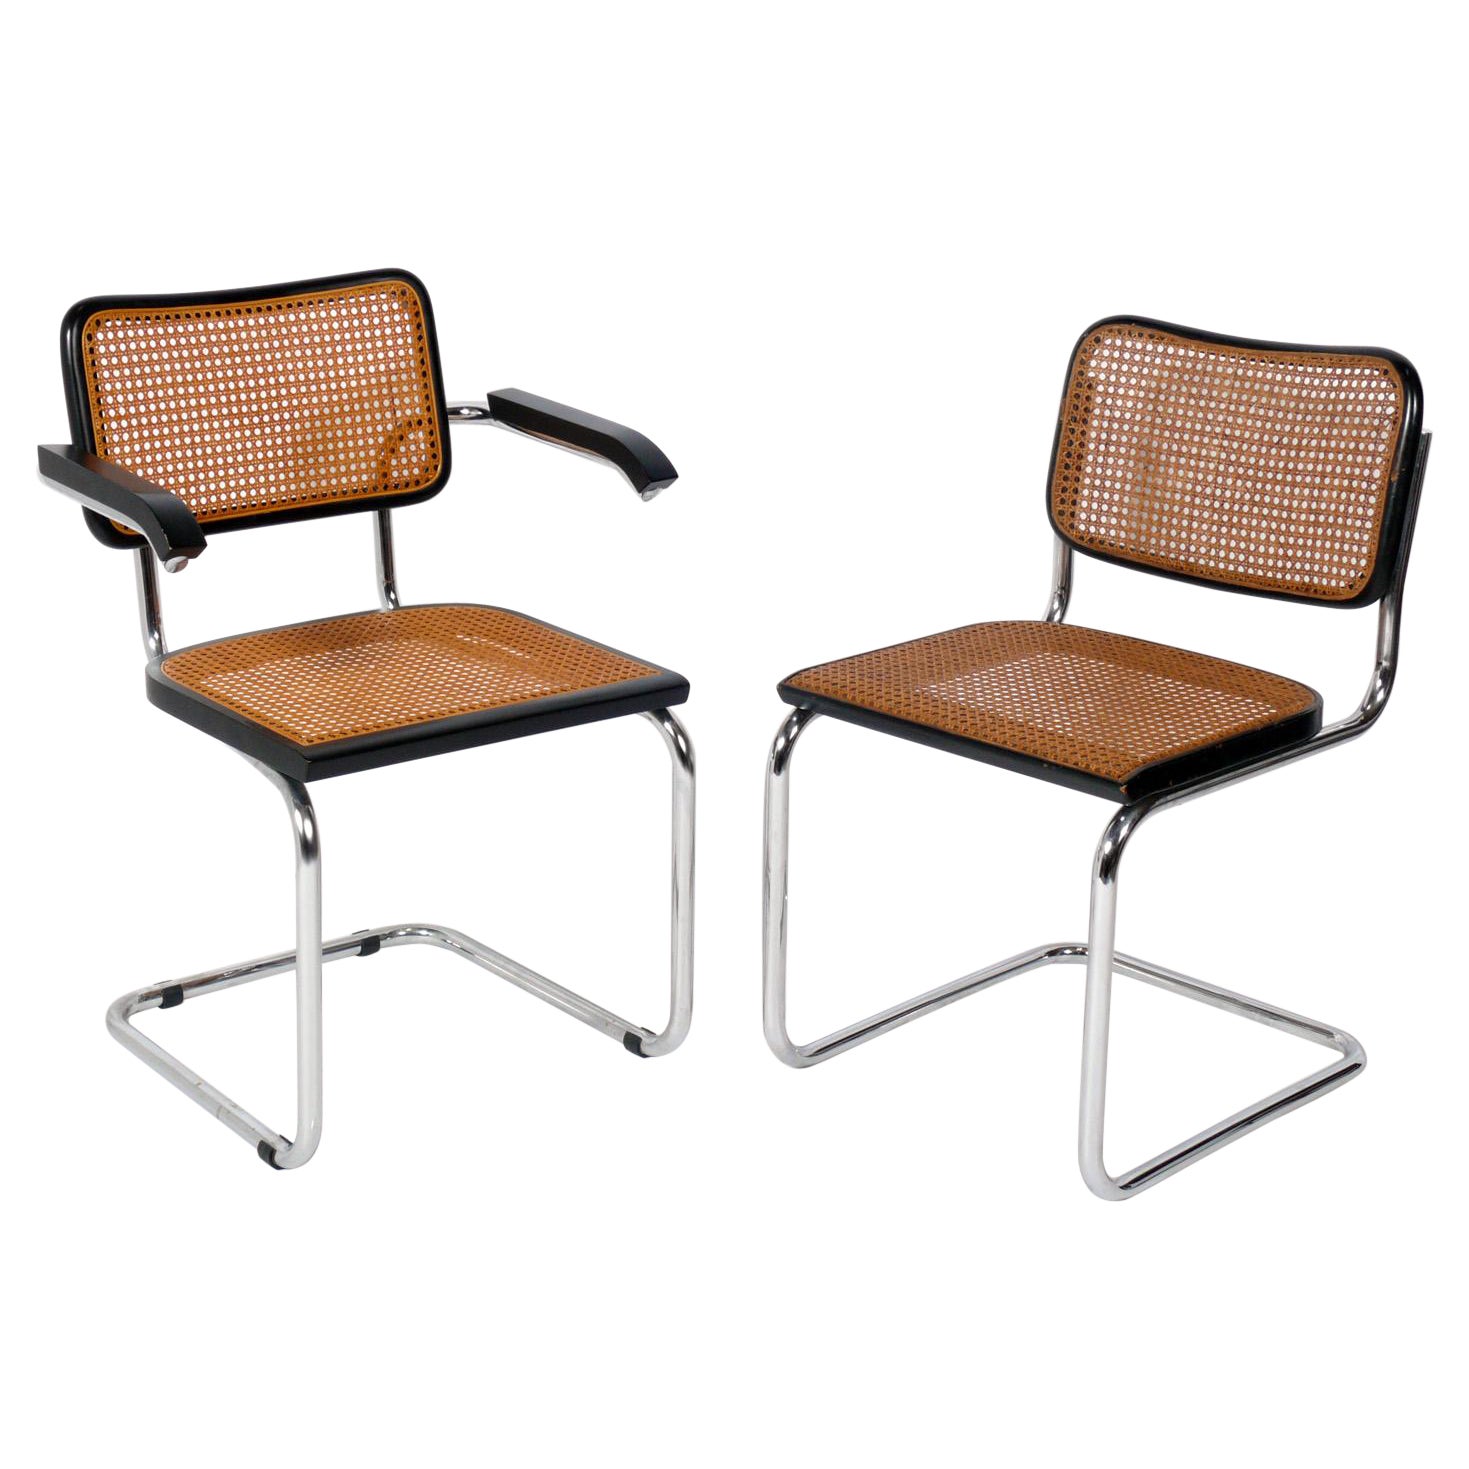 Marcel Breuer Cesca Dining Chairs, 12 Available